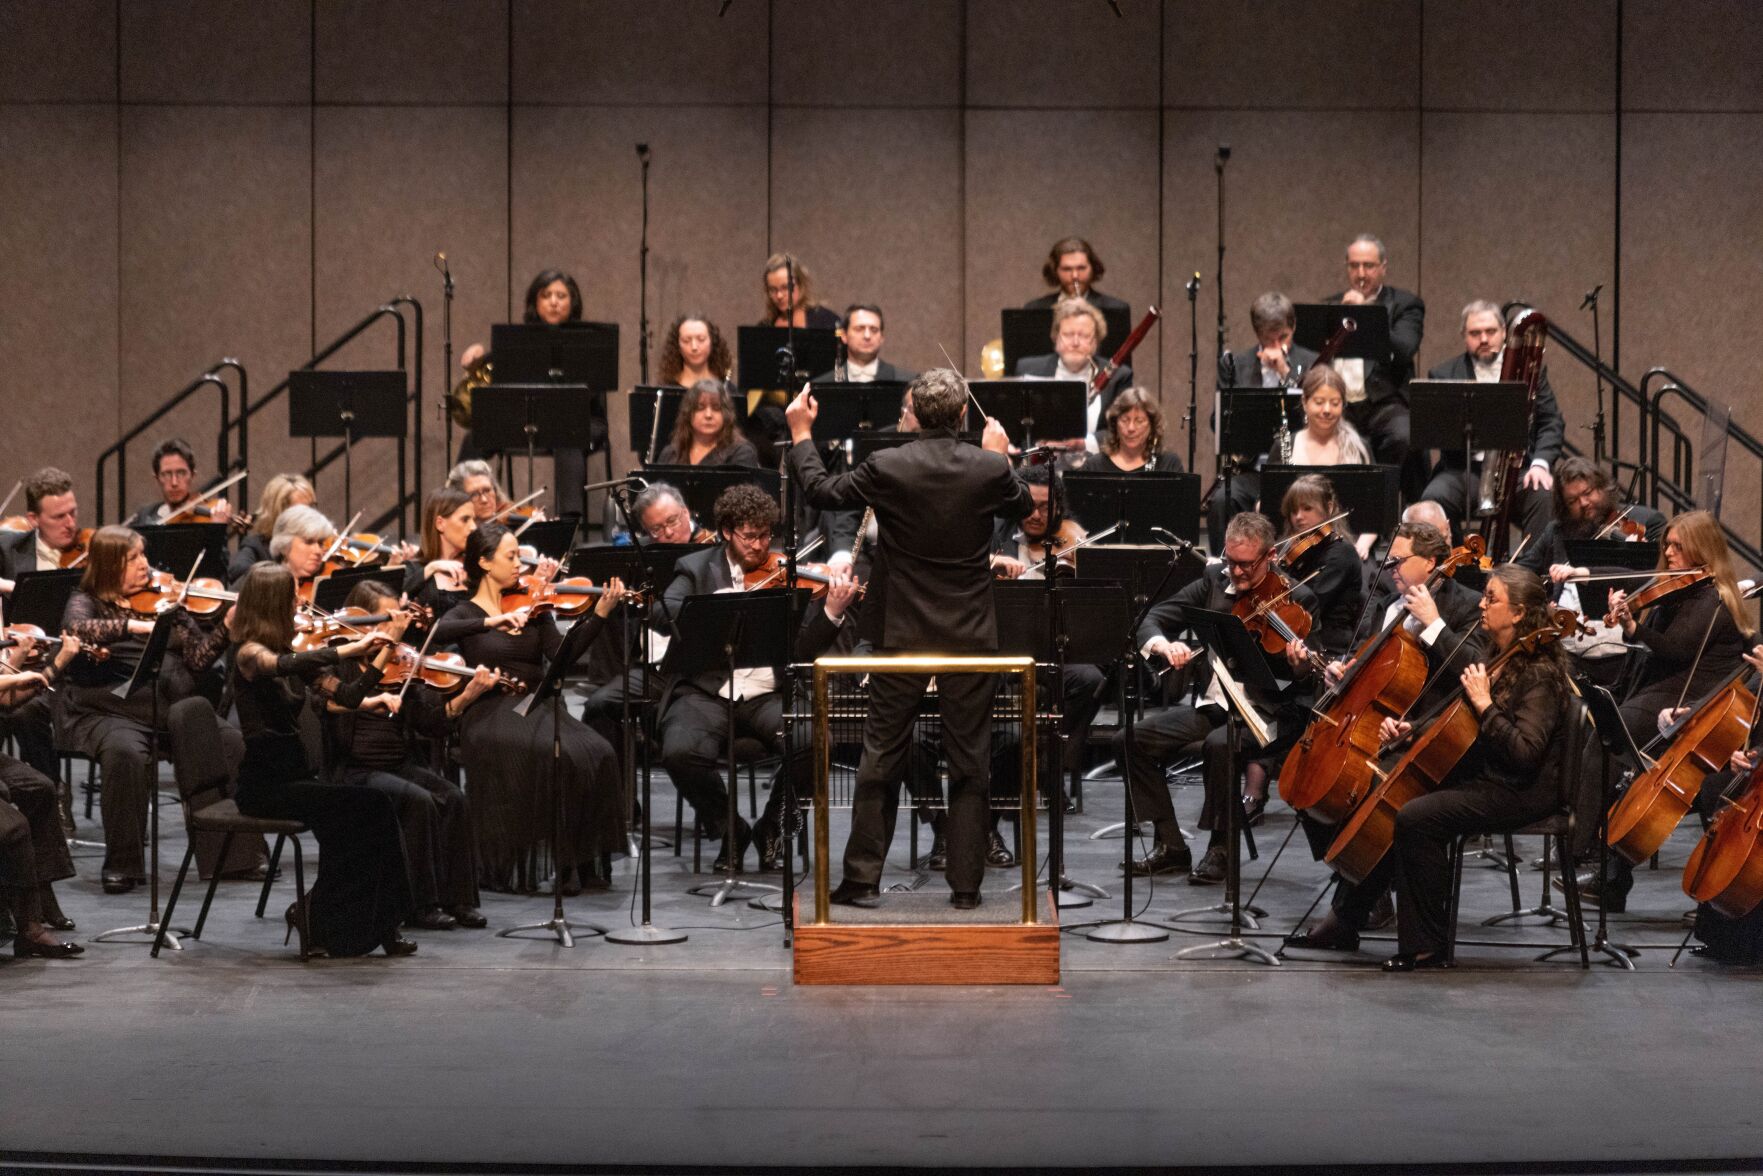 Tulsa Symphony Orchestra opens new season with Beethoven